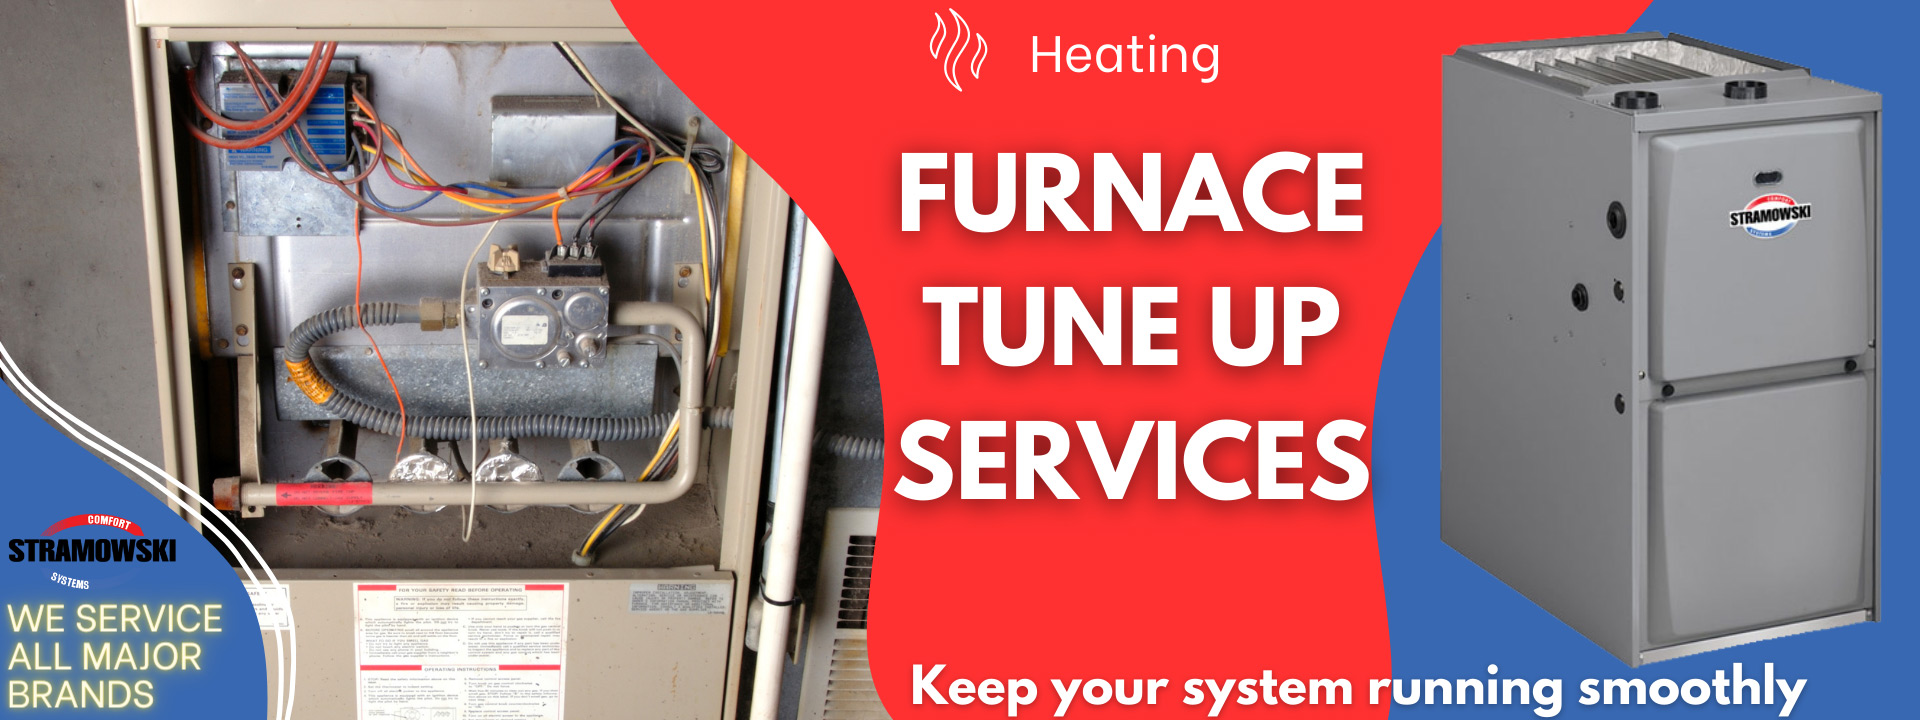 Furnace Tune Up Maintenance Services